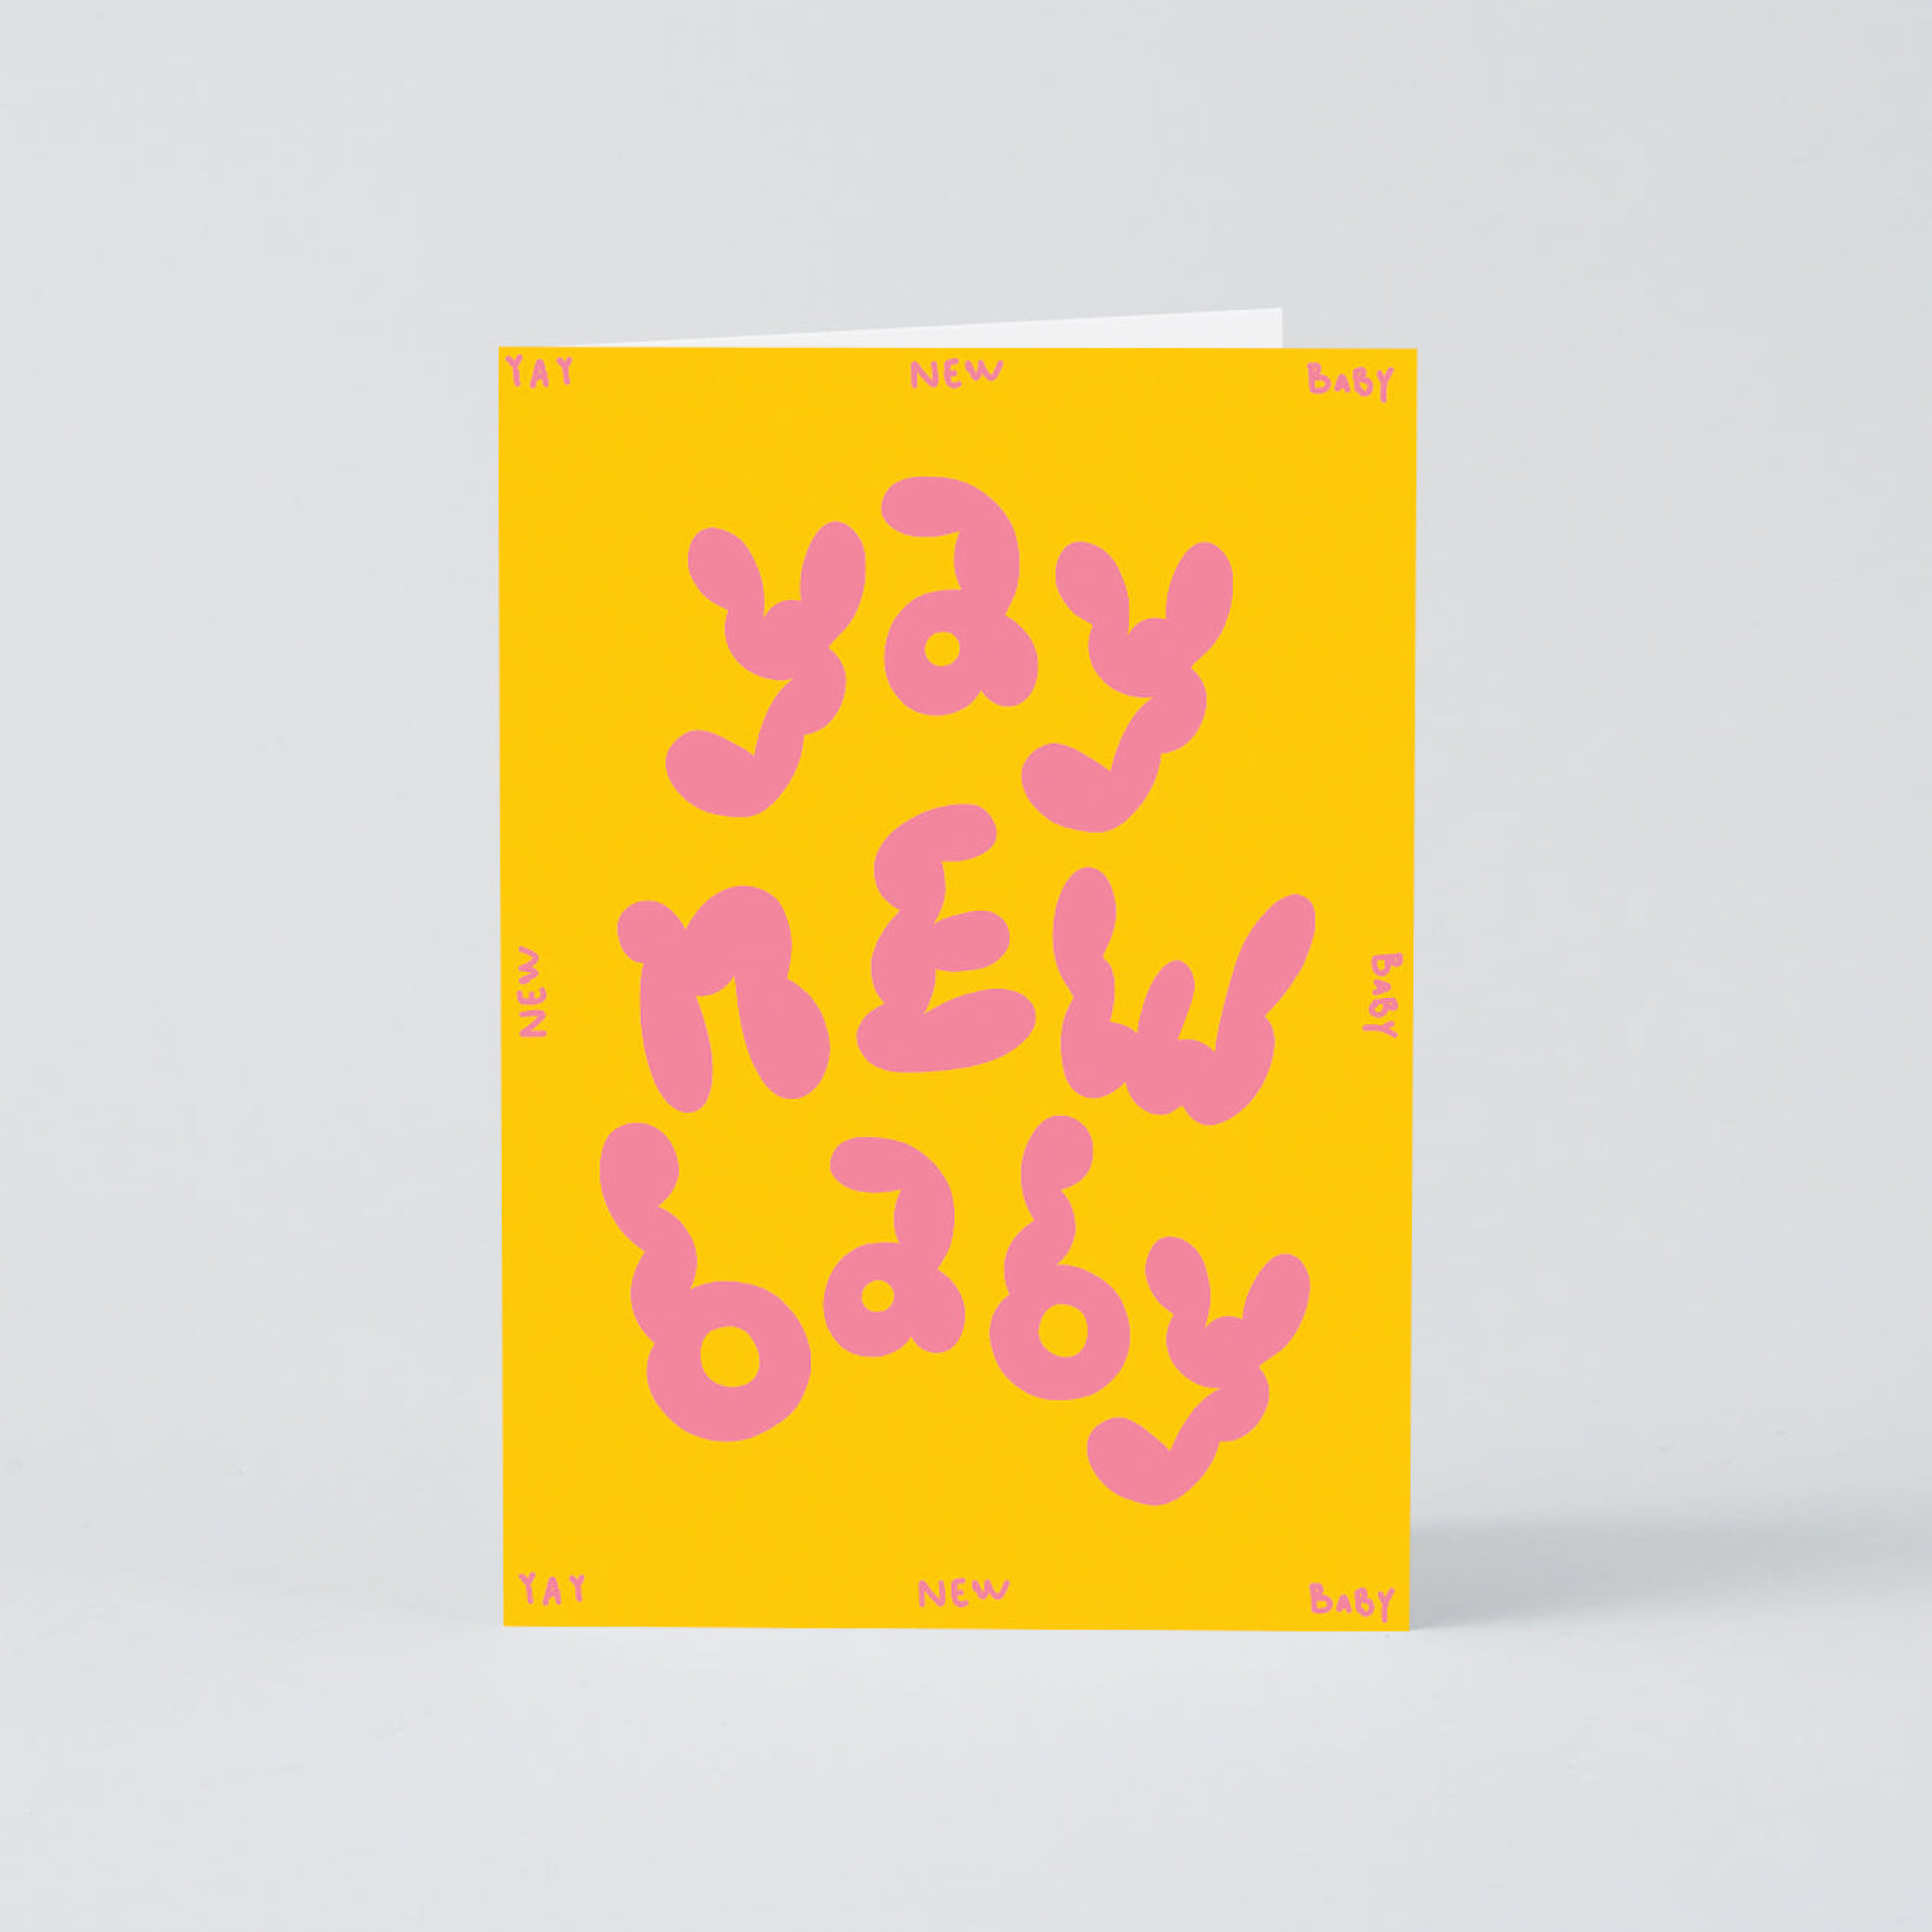 [WRAP] Yay New Baby Embossed Greetings Card